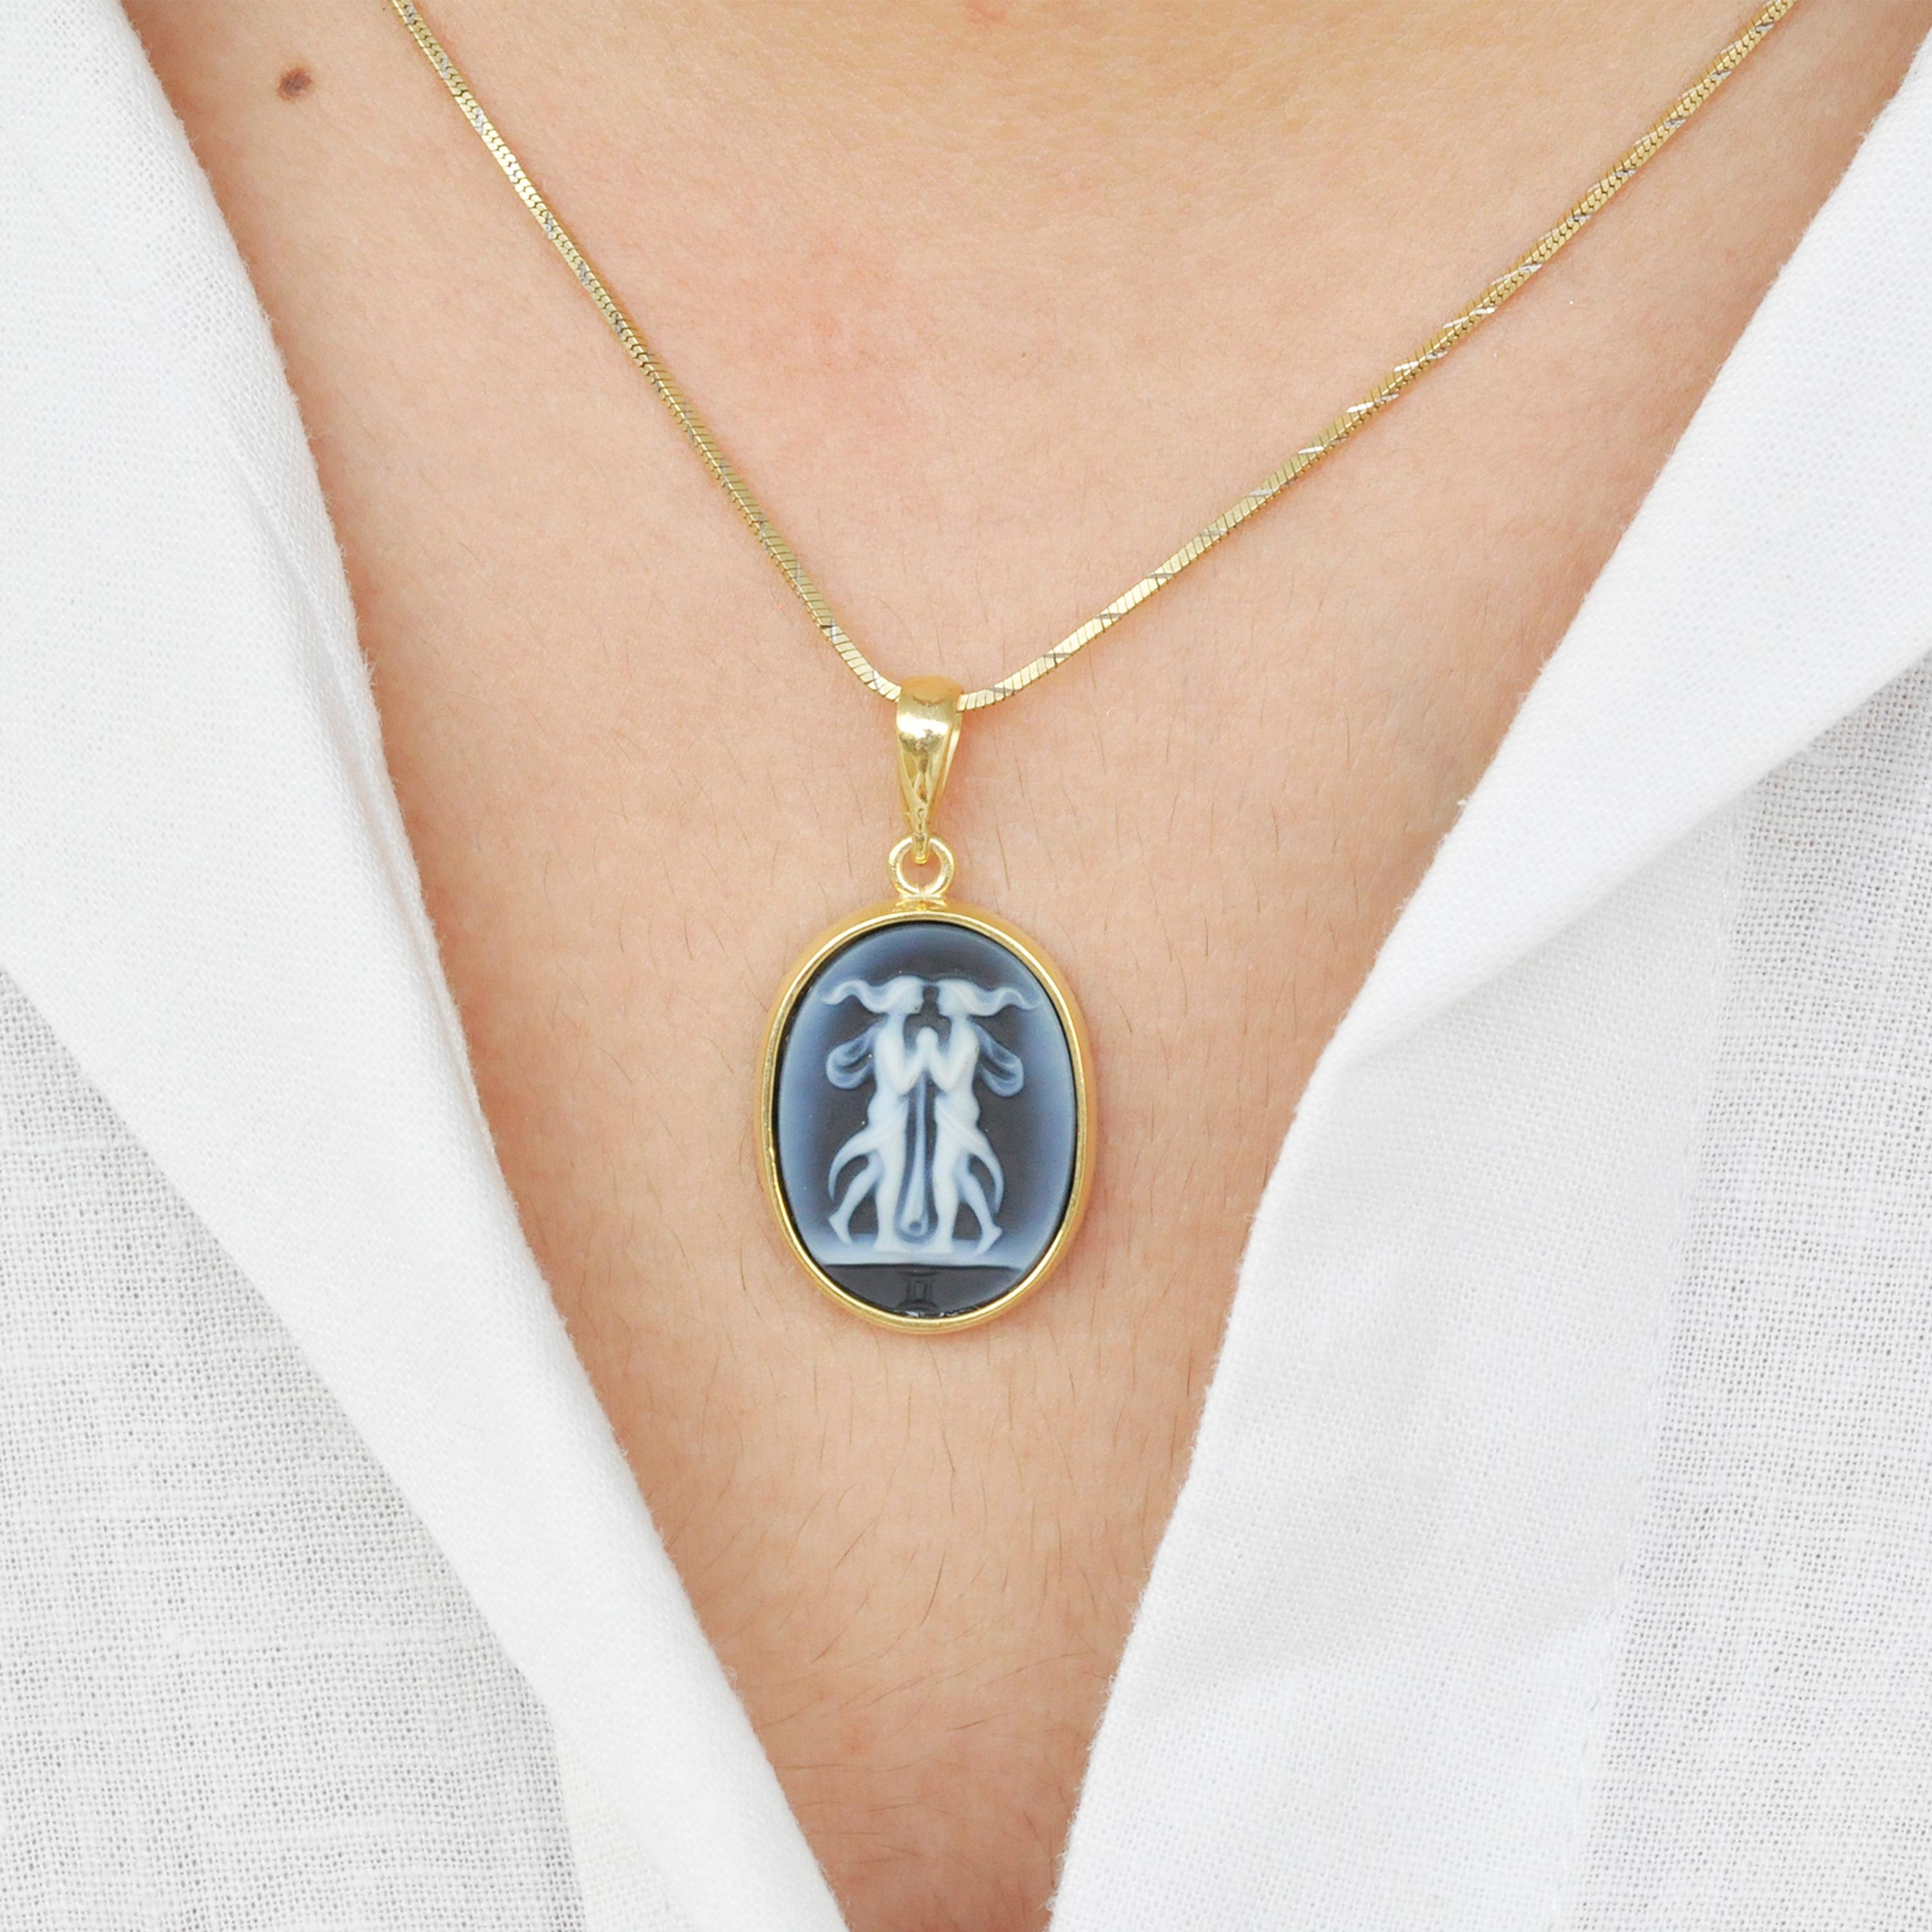 Here's our gemini zodiac carving cameo pendant necklace from the zodiac collection. The cameo is made in Germany by an expert cameo engraver on the relief of 100% natural agate rock from Brazil (a variety of chalcedony). The pendant is set in our